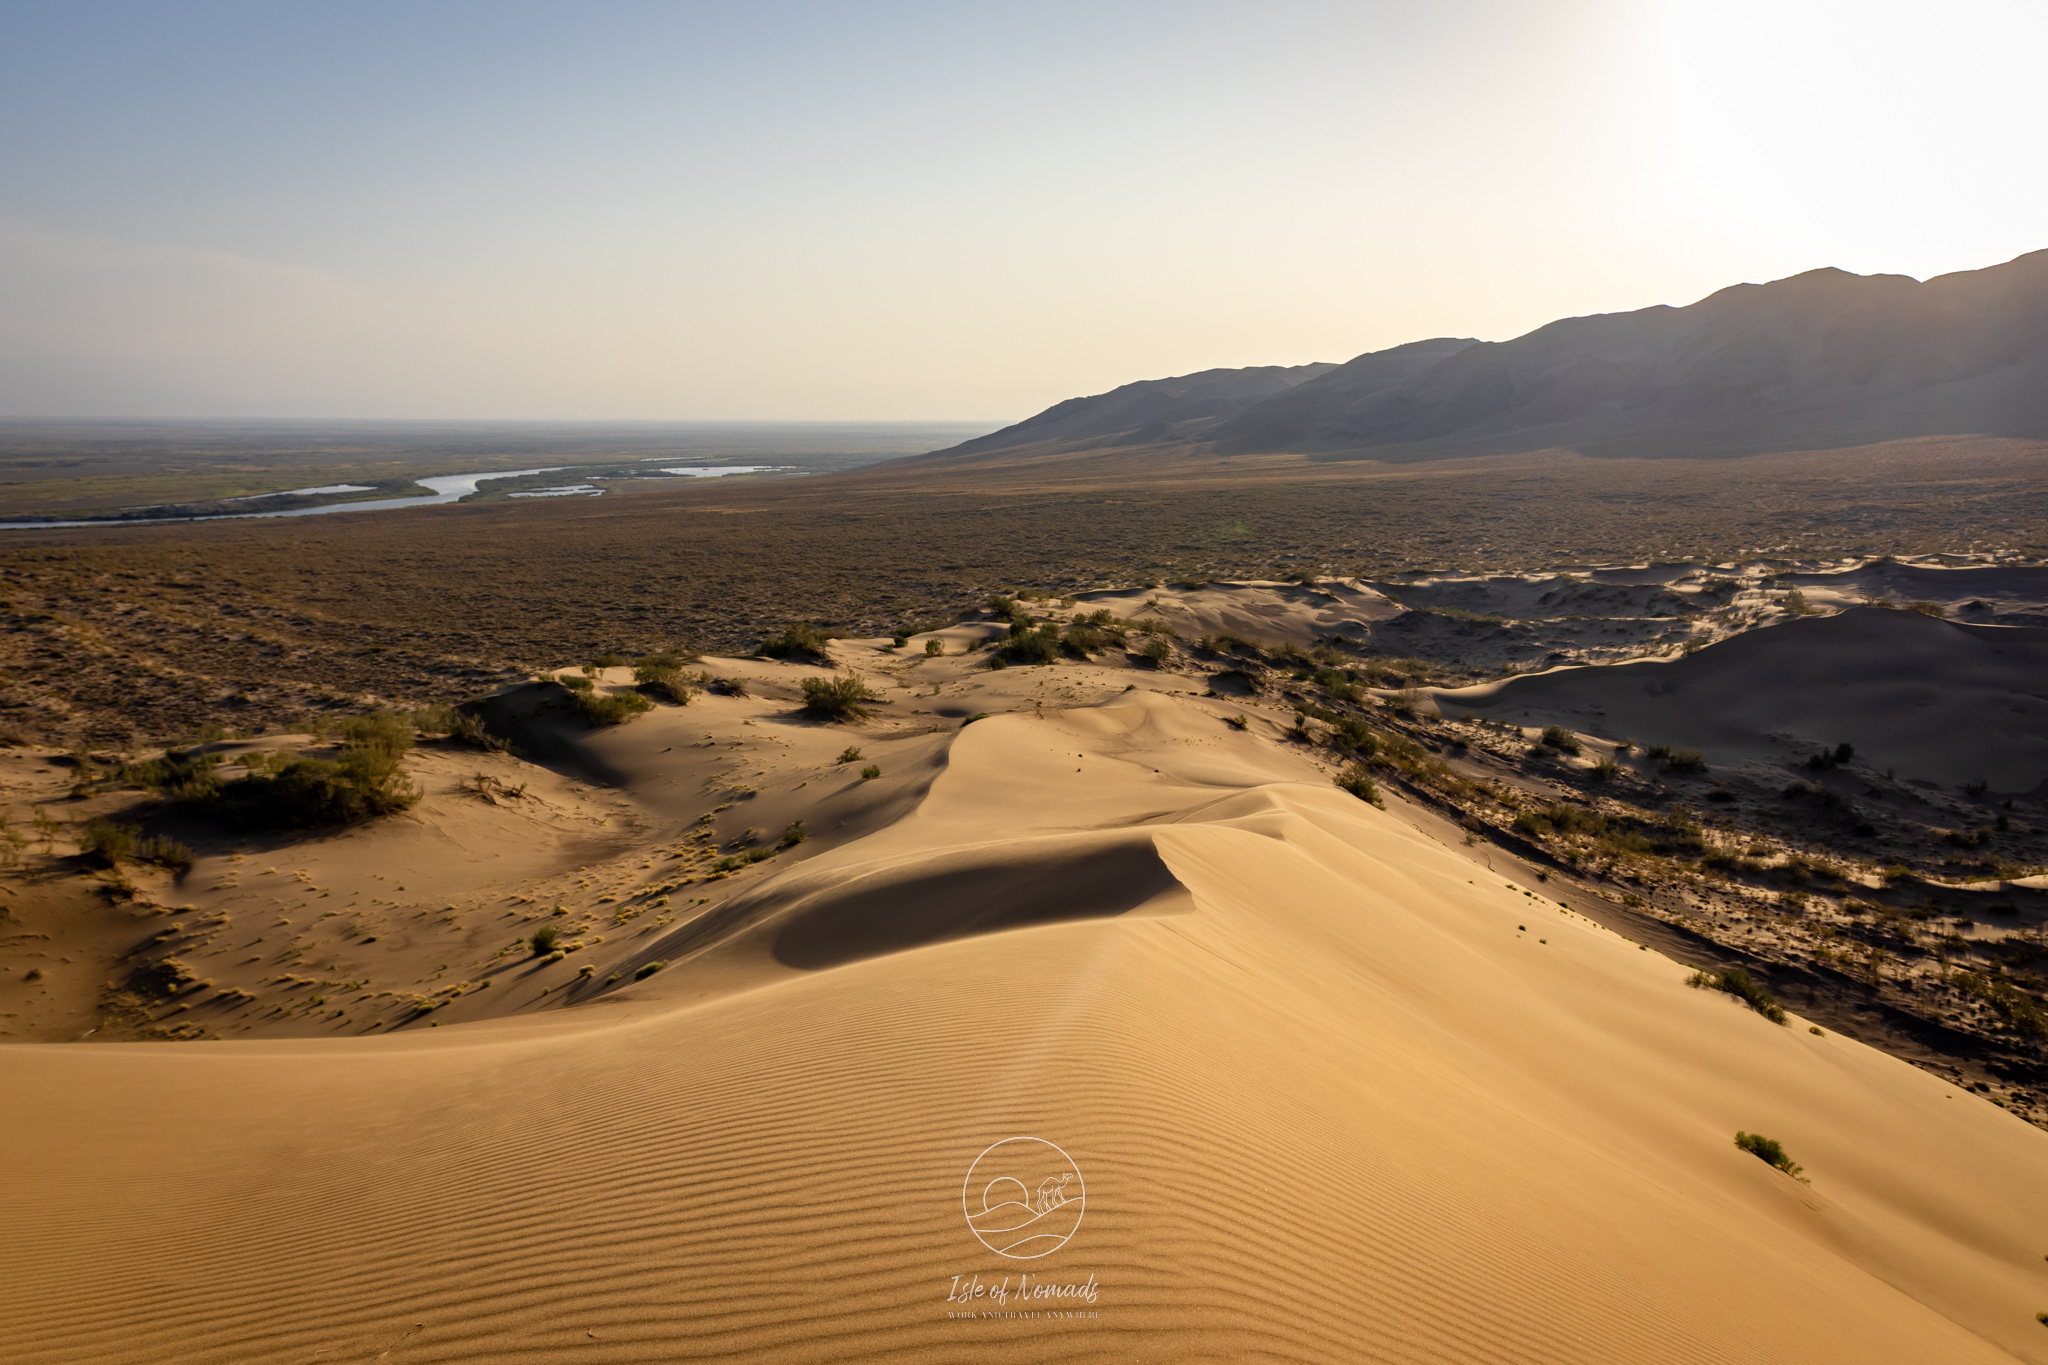 Make sure you climb all the way to the top of the dune - the views of the river and valley are stunning!